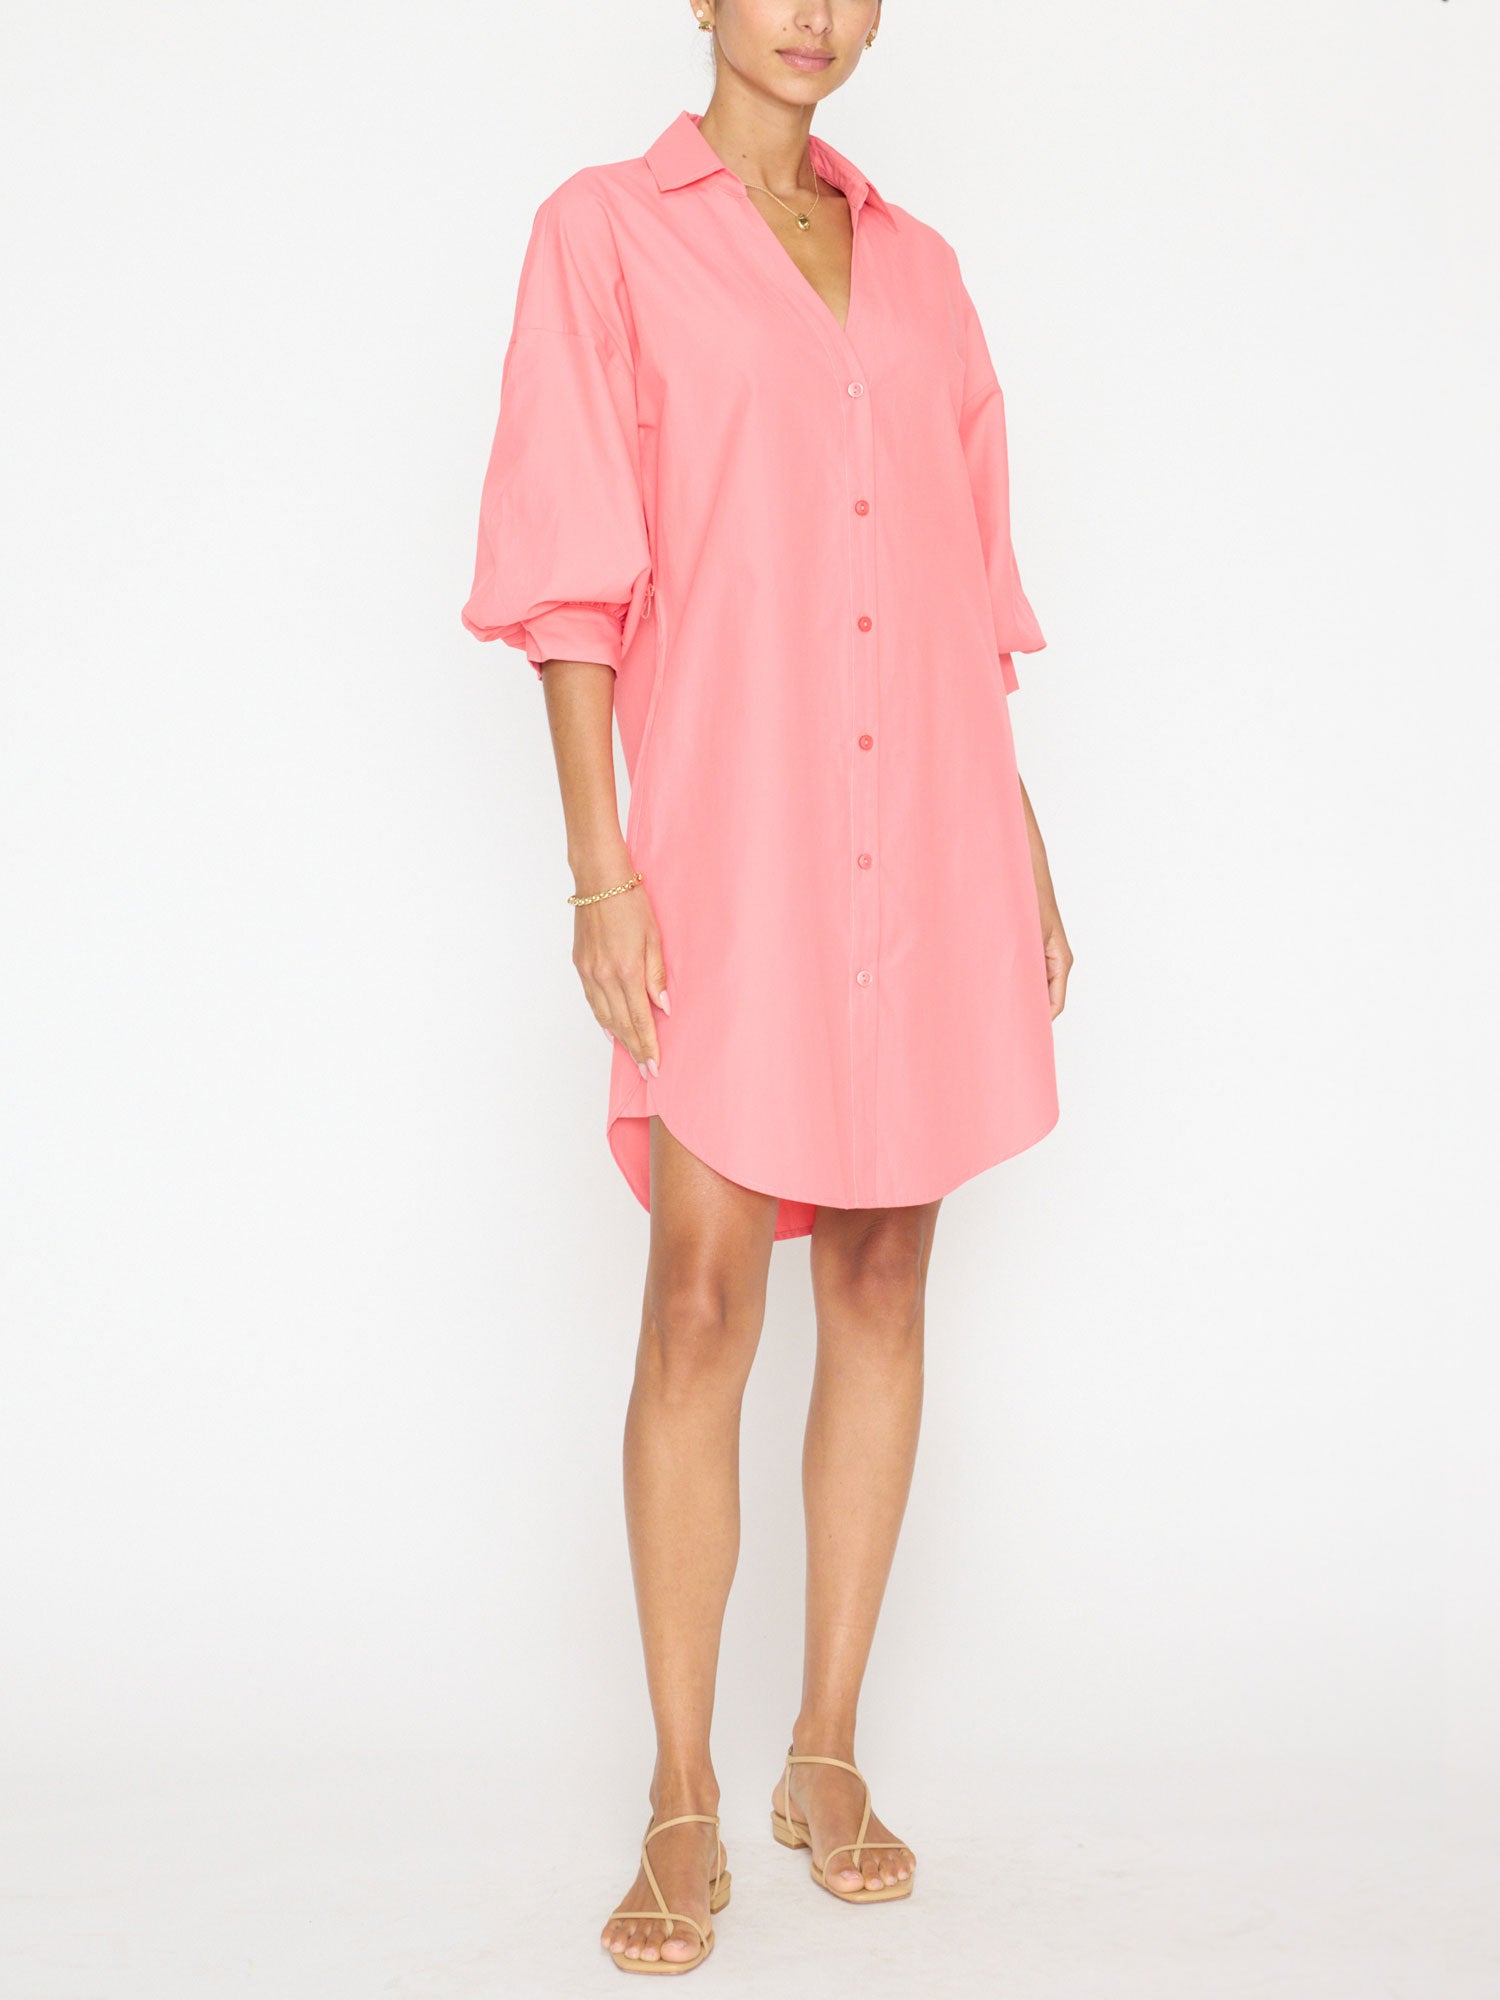 Kate belted button up mini shirtdress pink full view 2